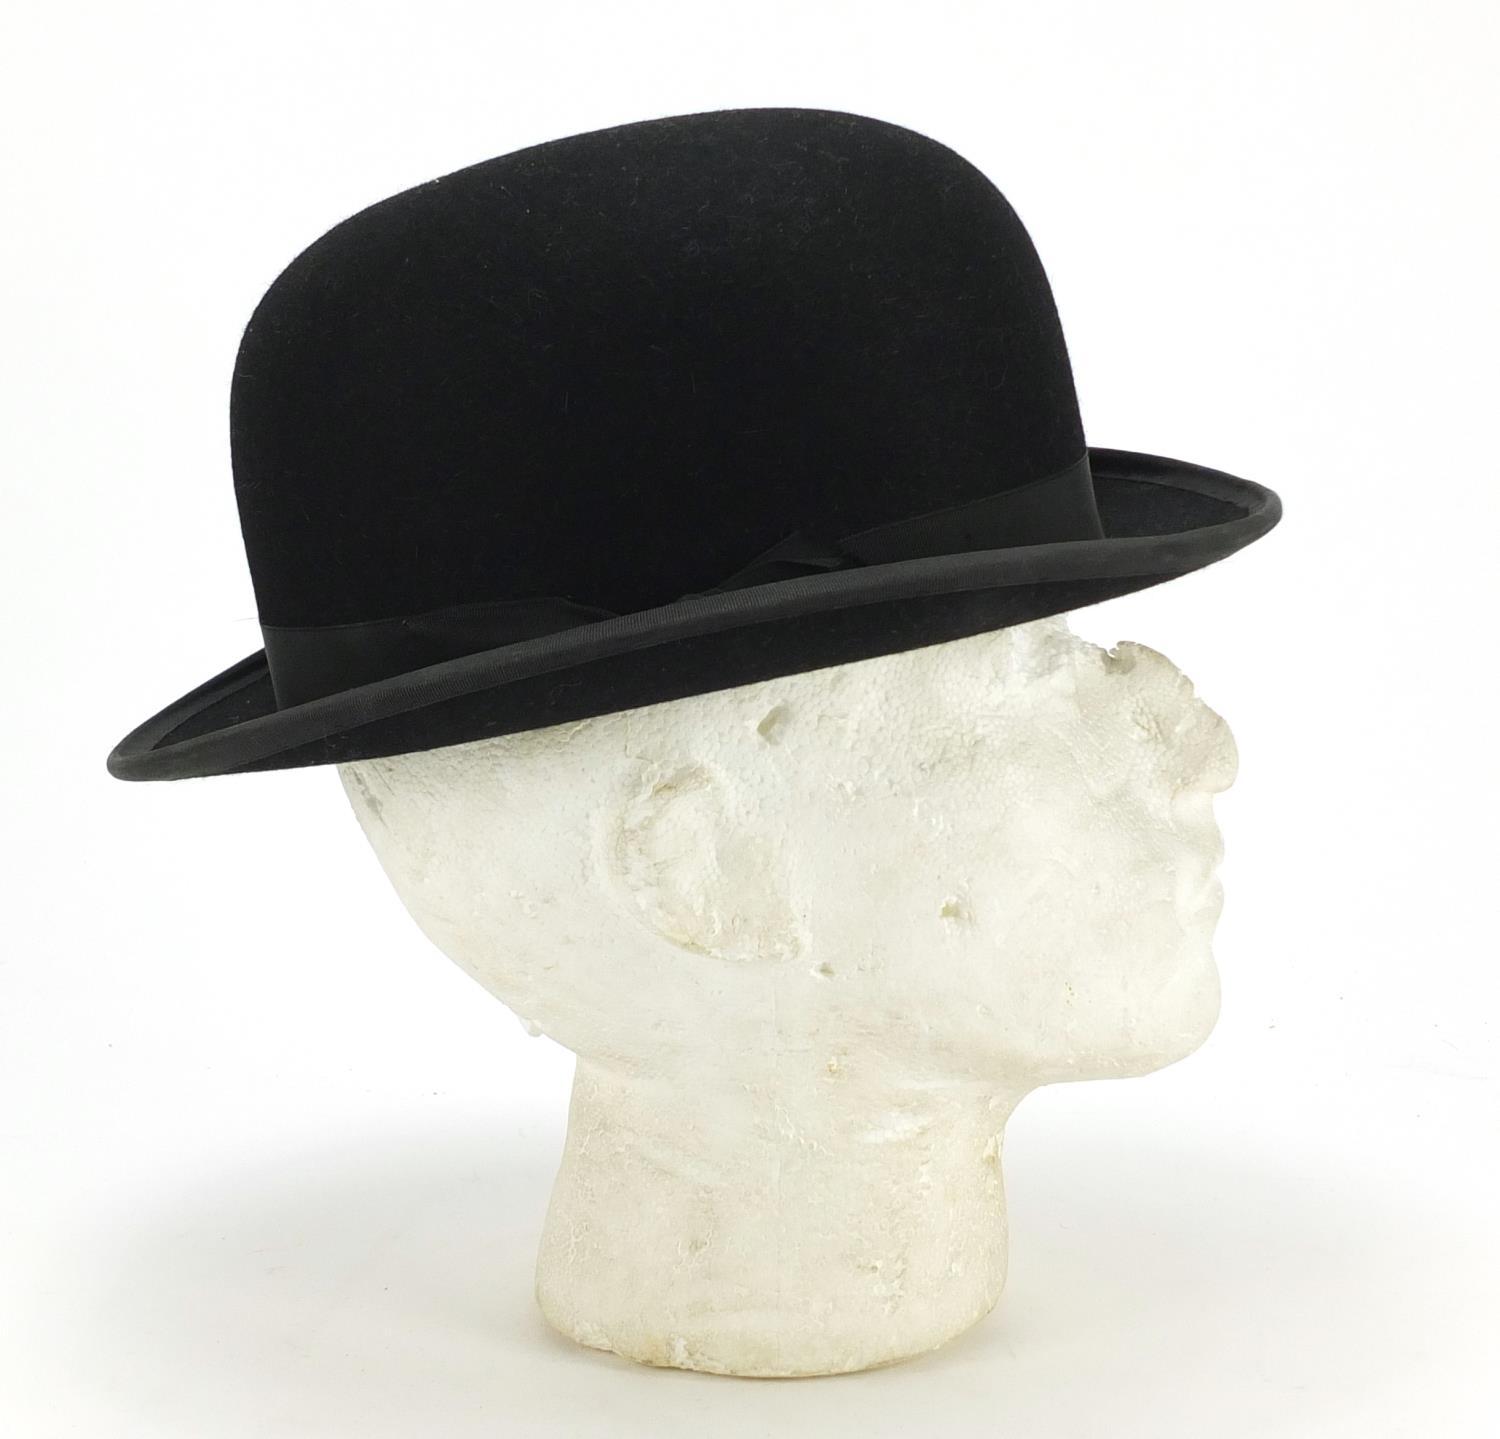 Gentleman's bowler hat retailed by Lock and Co, London, with box, the interior measurements, 21cm - Image 5 of 8